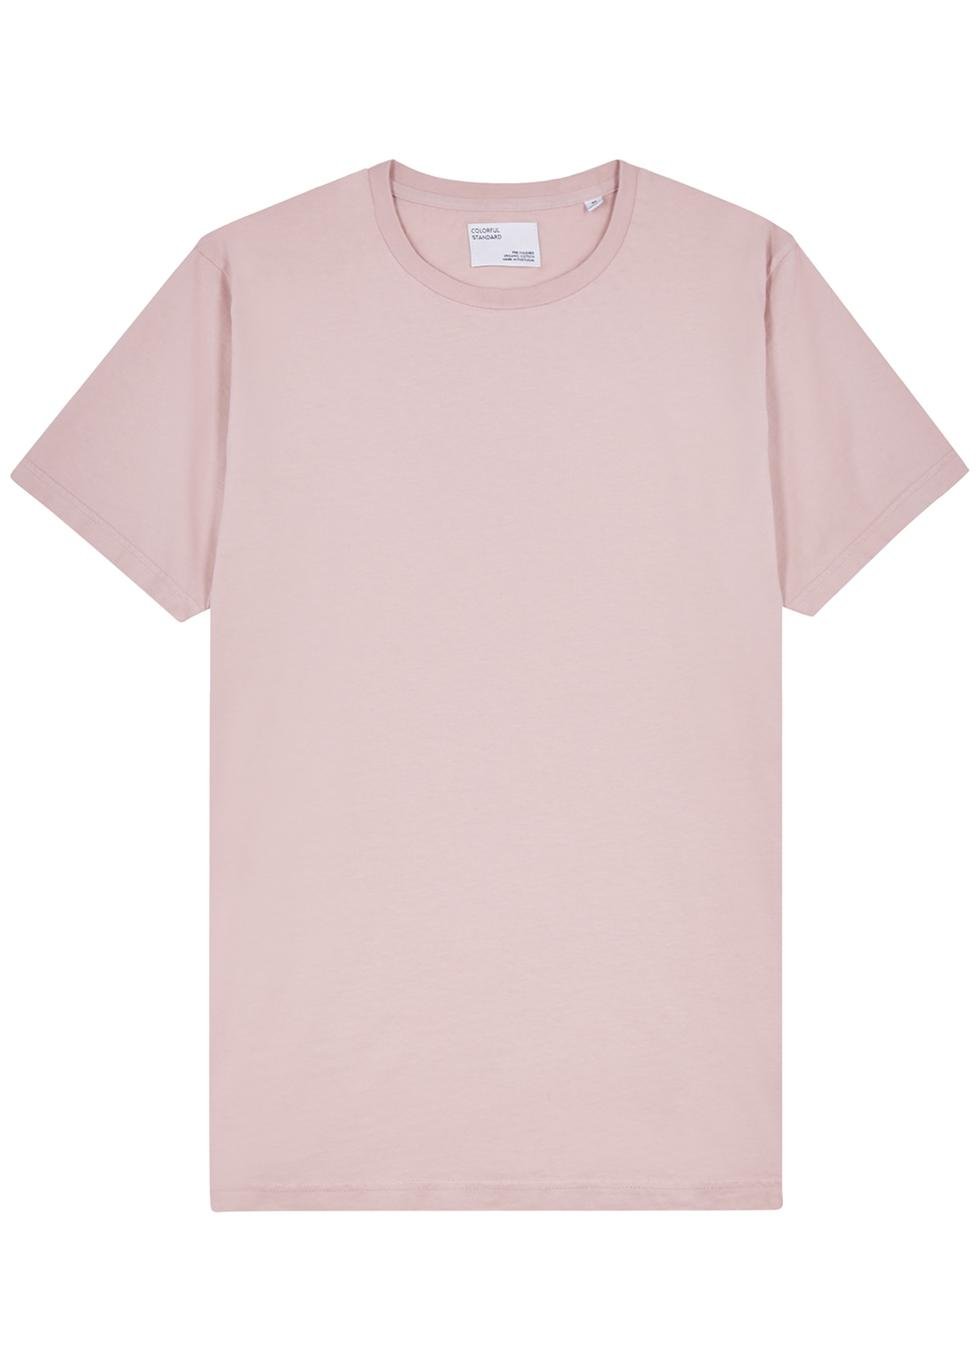 Cotton T-shirt by COLORFUL STANDARD